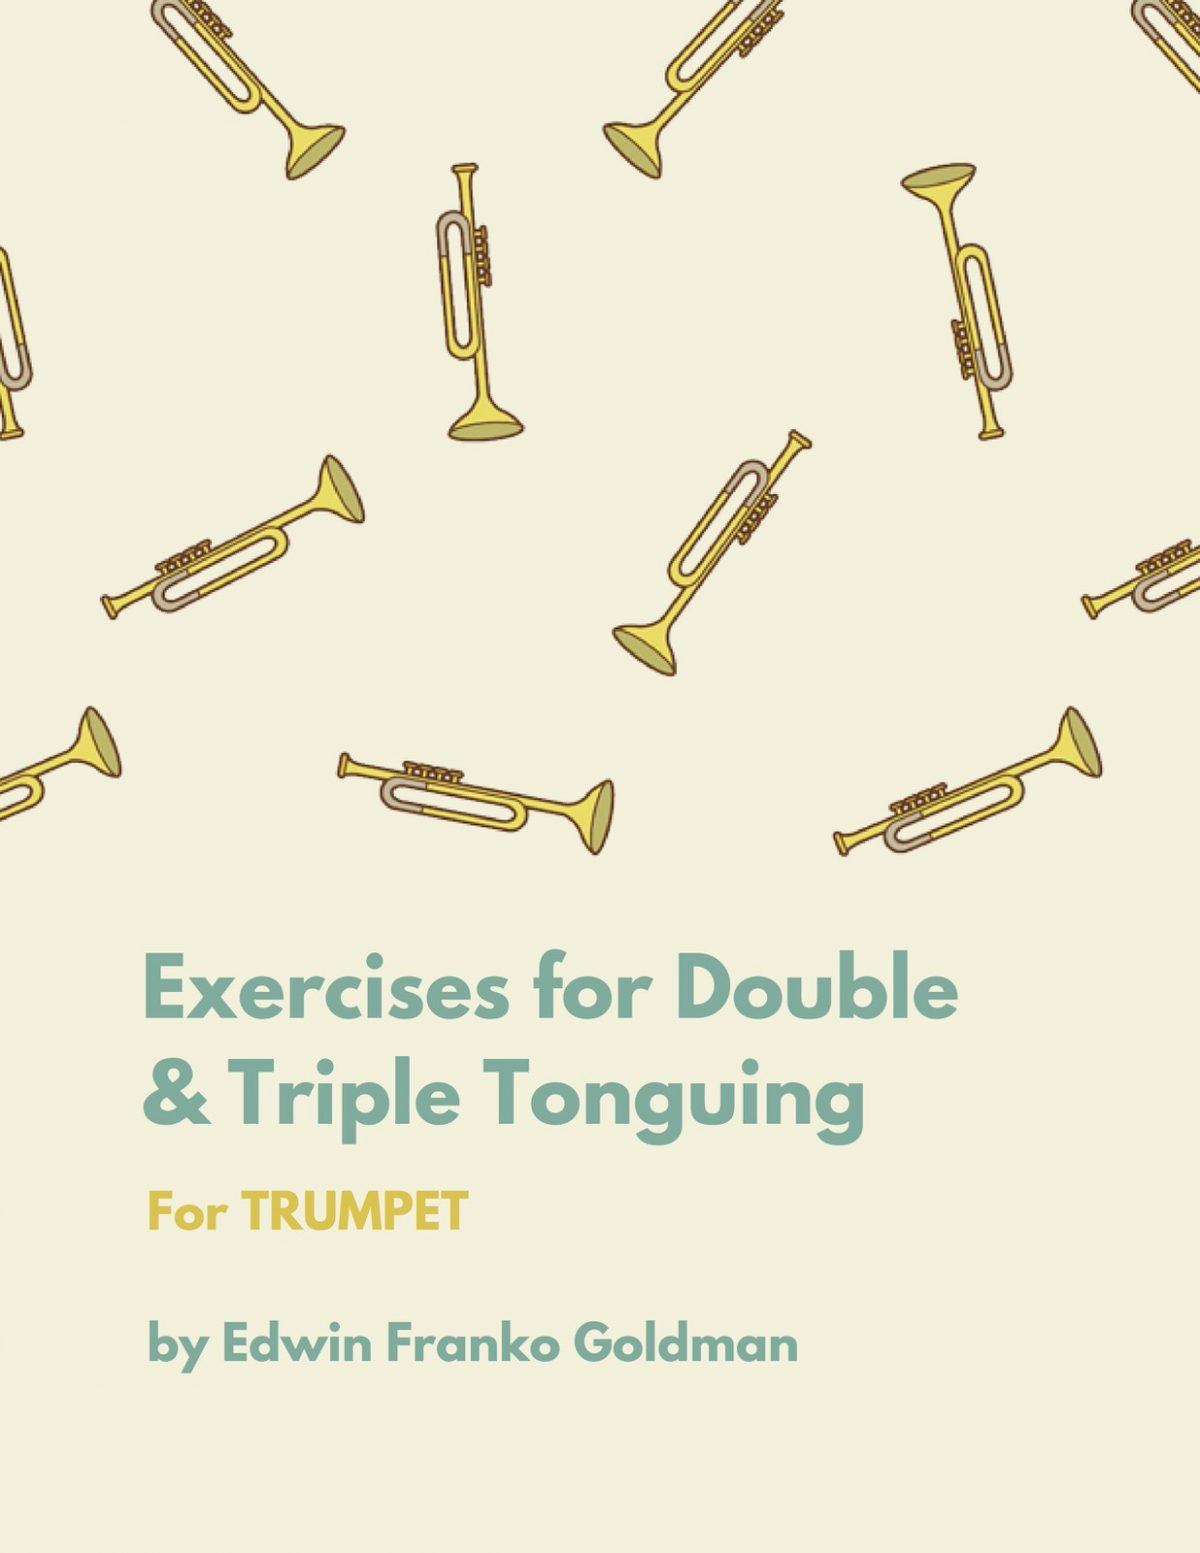 Goldman, Exercises for Double and Triple Tonguing-p01